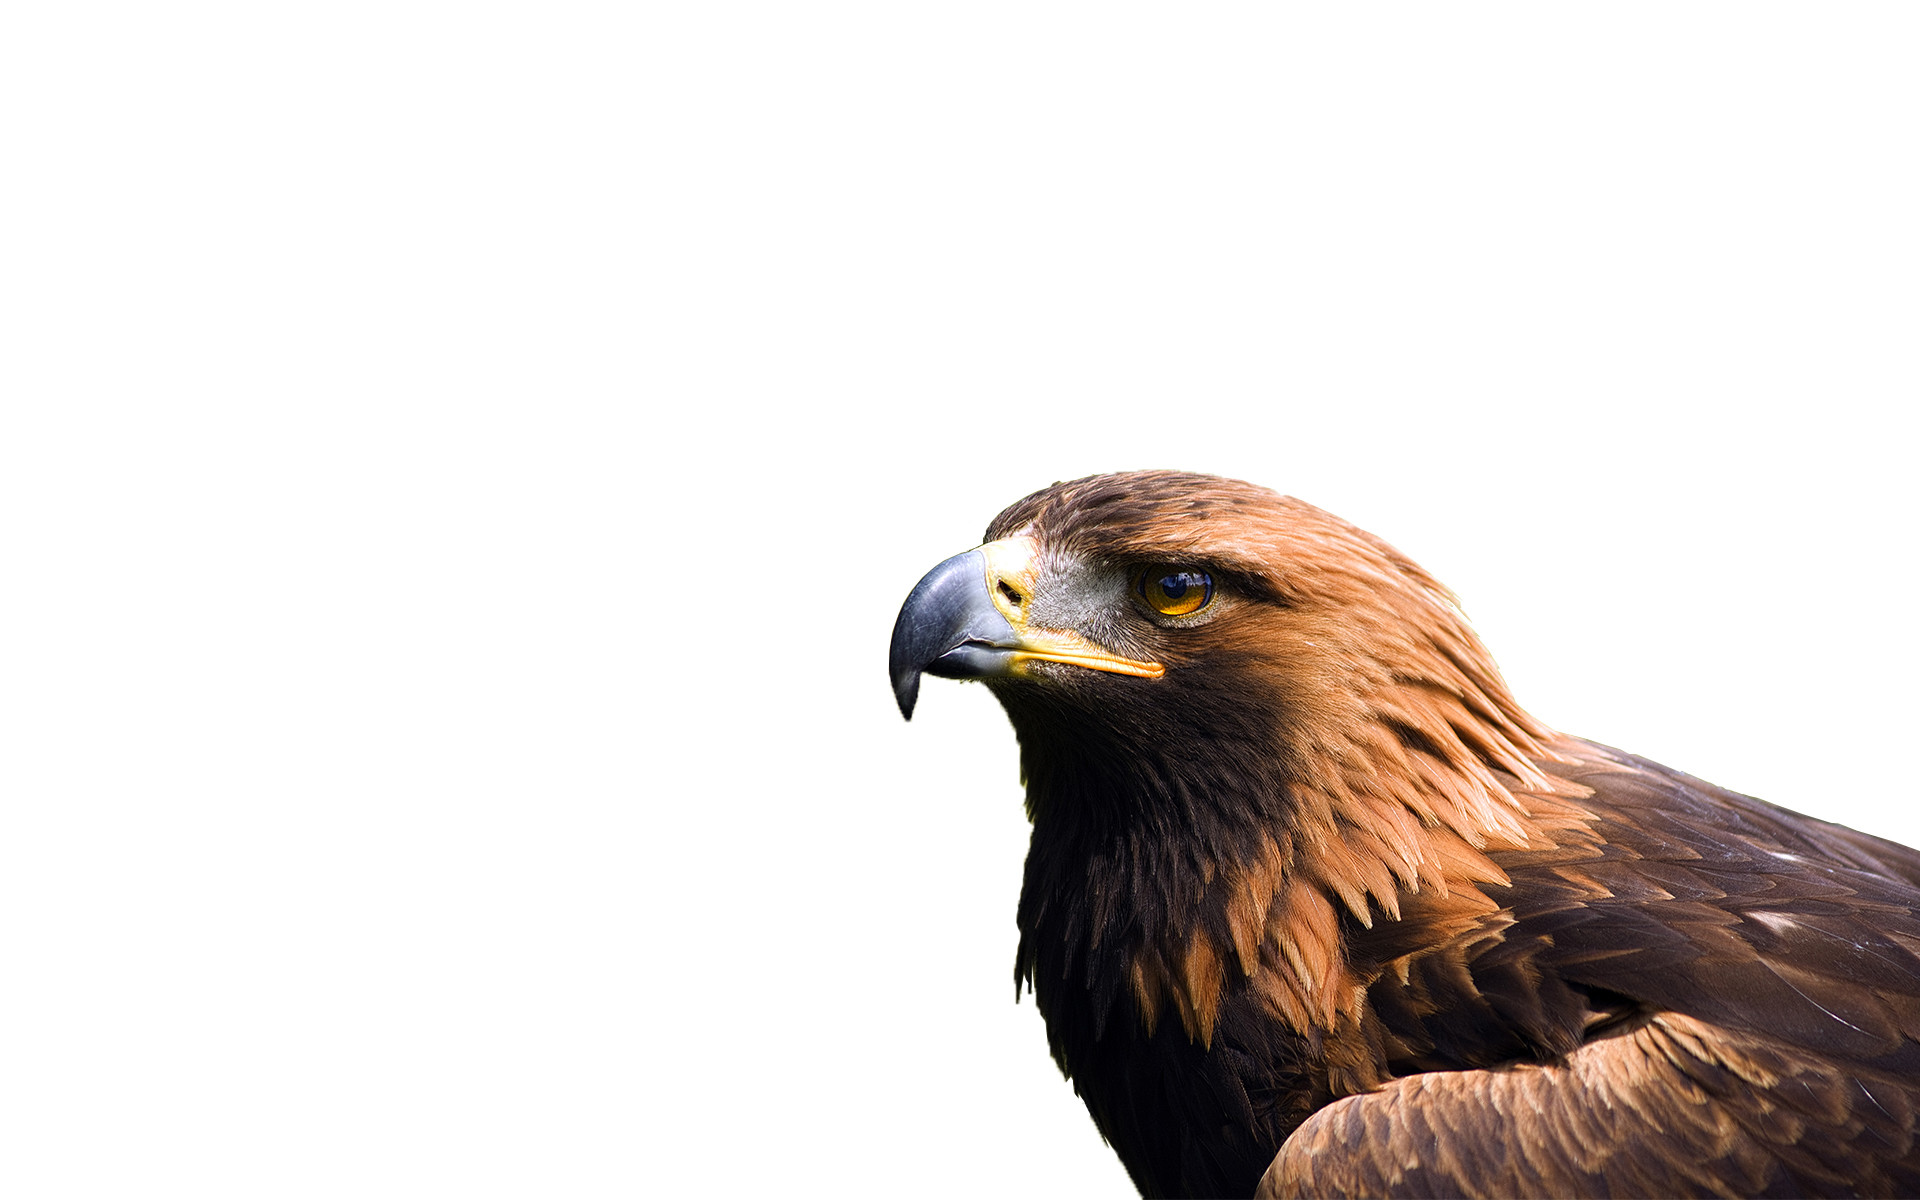  Eagle  Background Pictures   WallpaperTag